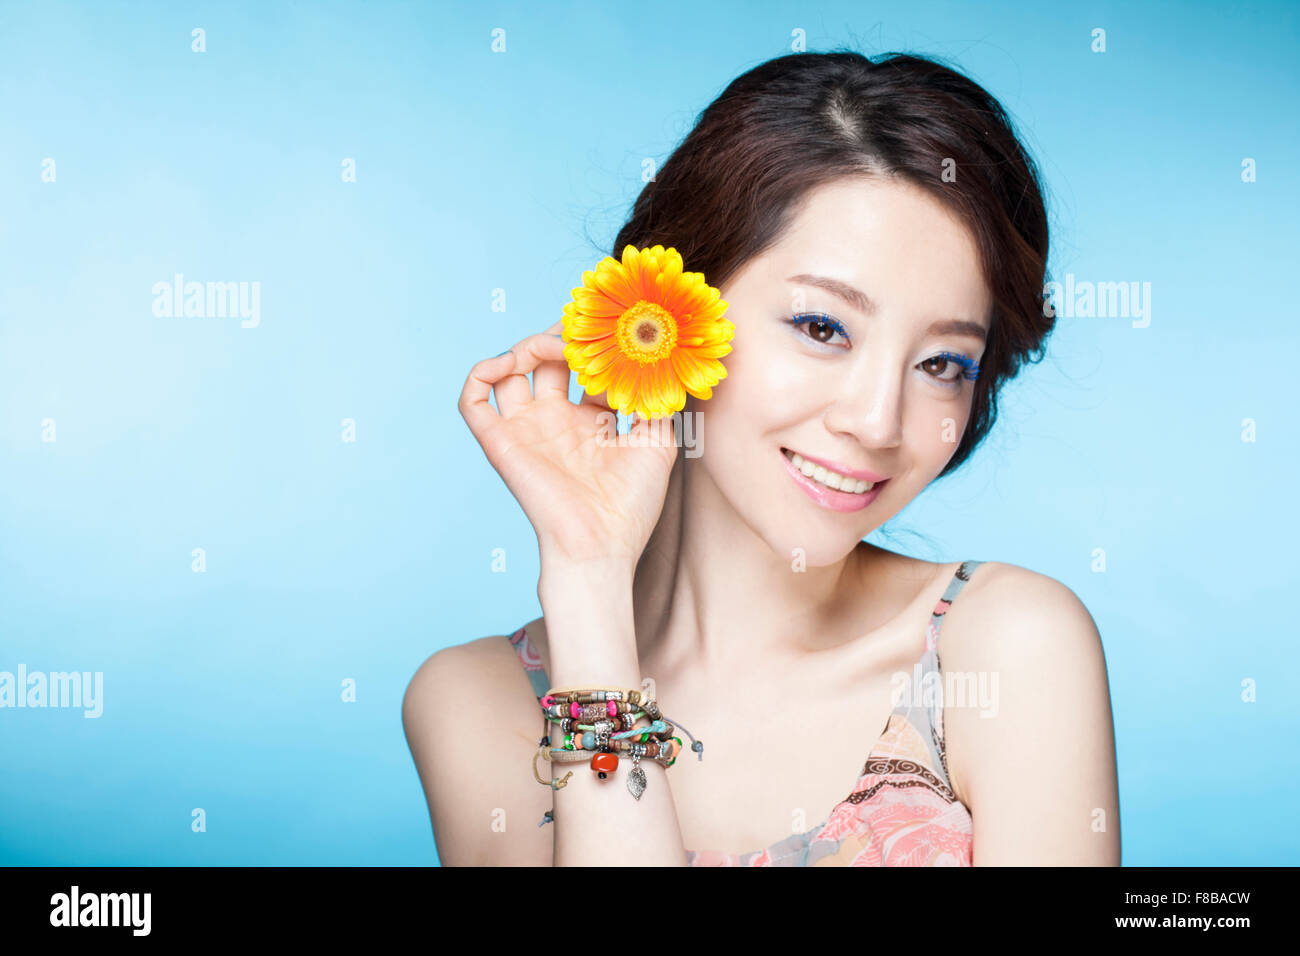 Woman in summer wear smiling and holding a flower close to her ear Stock Photo